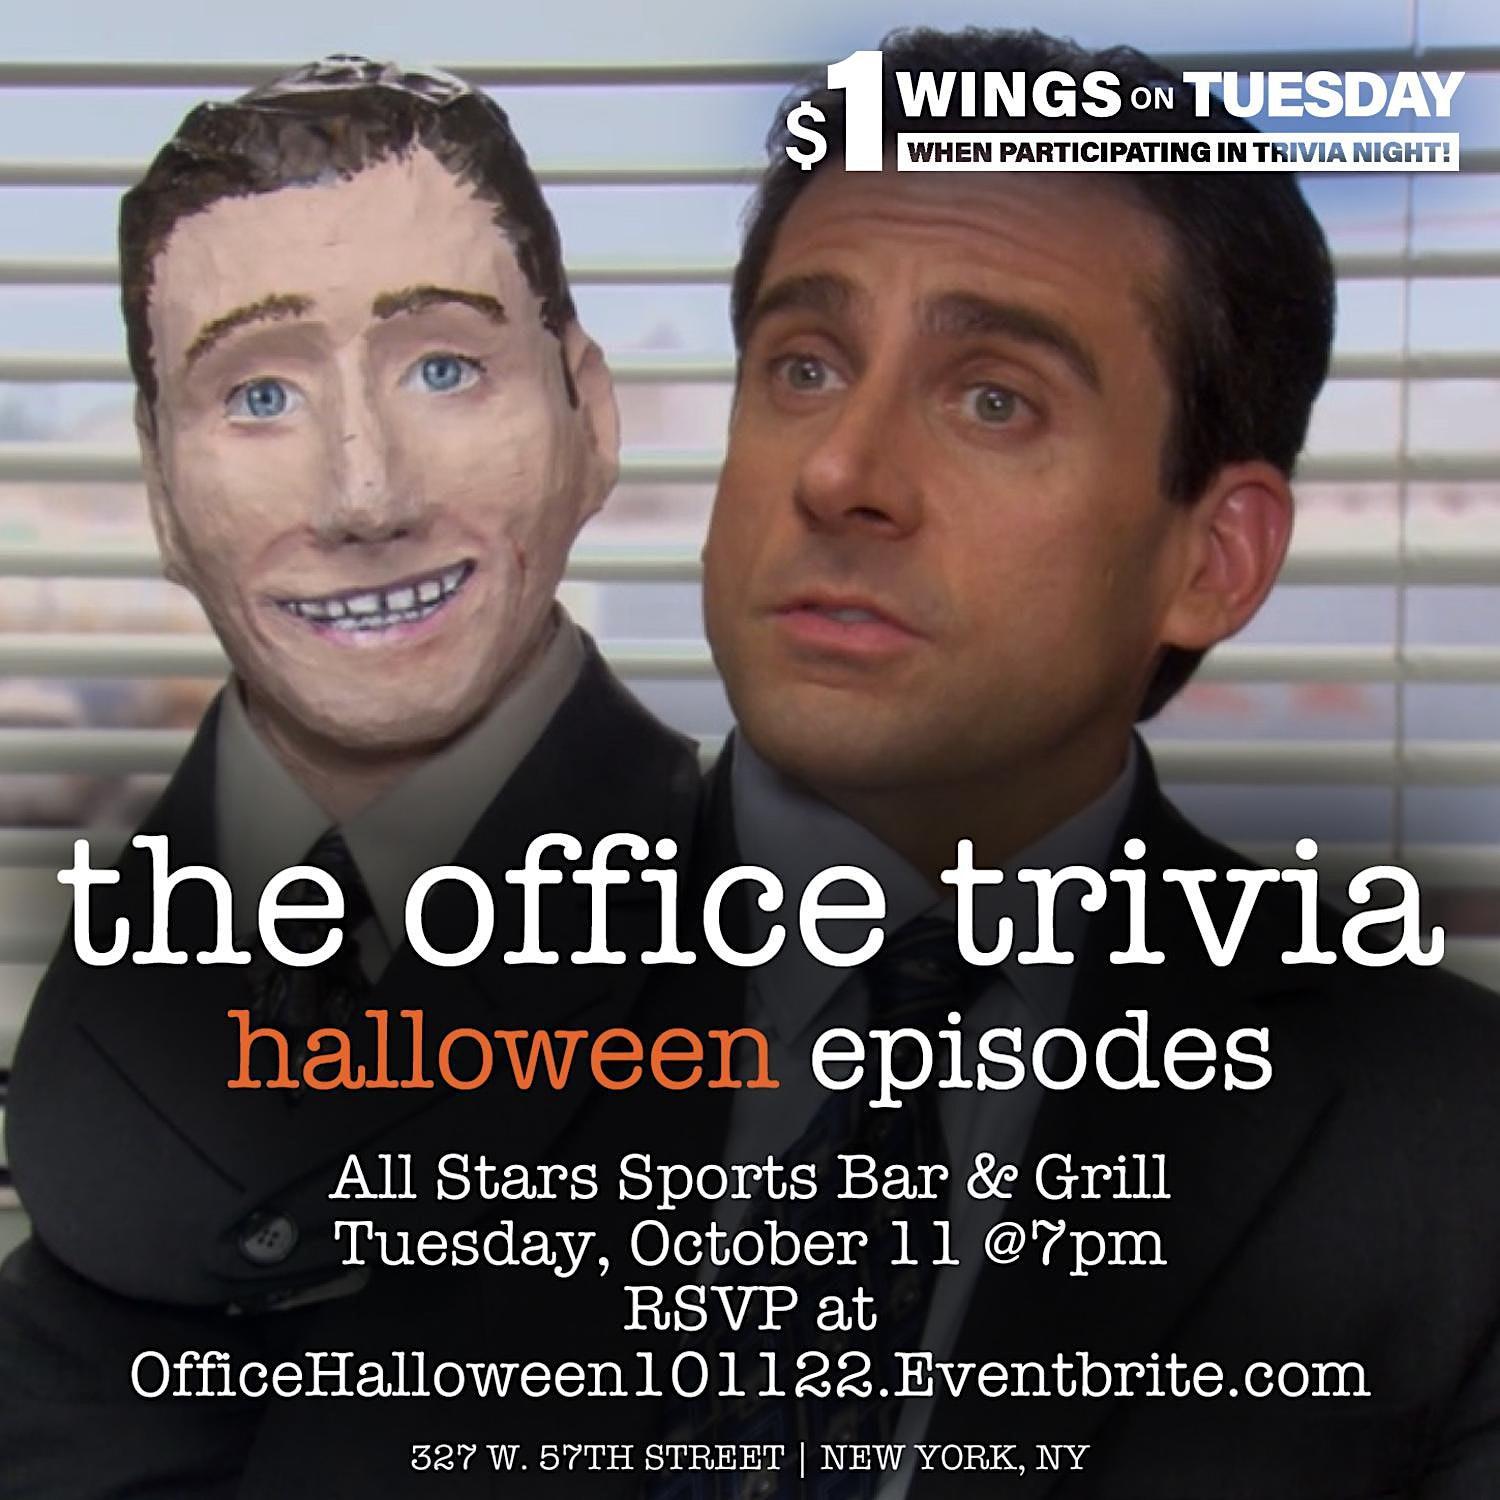 The Office Trivia: Halloween Episodes
Tue Oct 11, 7:00 PM - Tue Oct 11, 8:30 PM